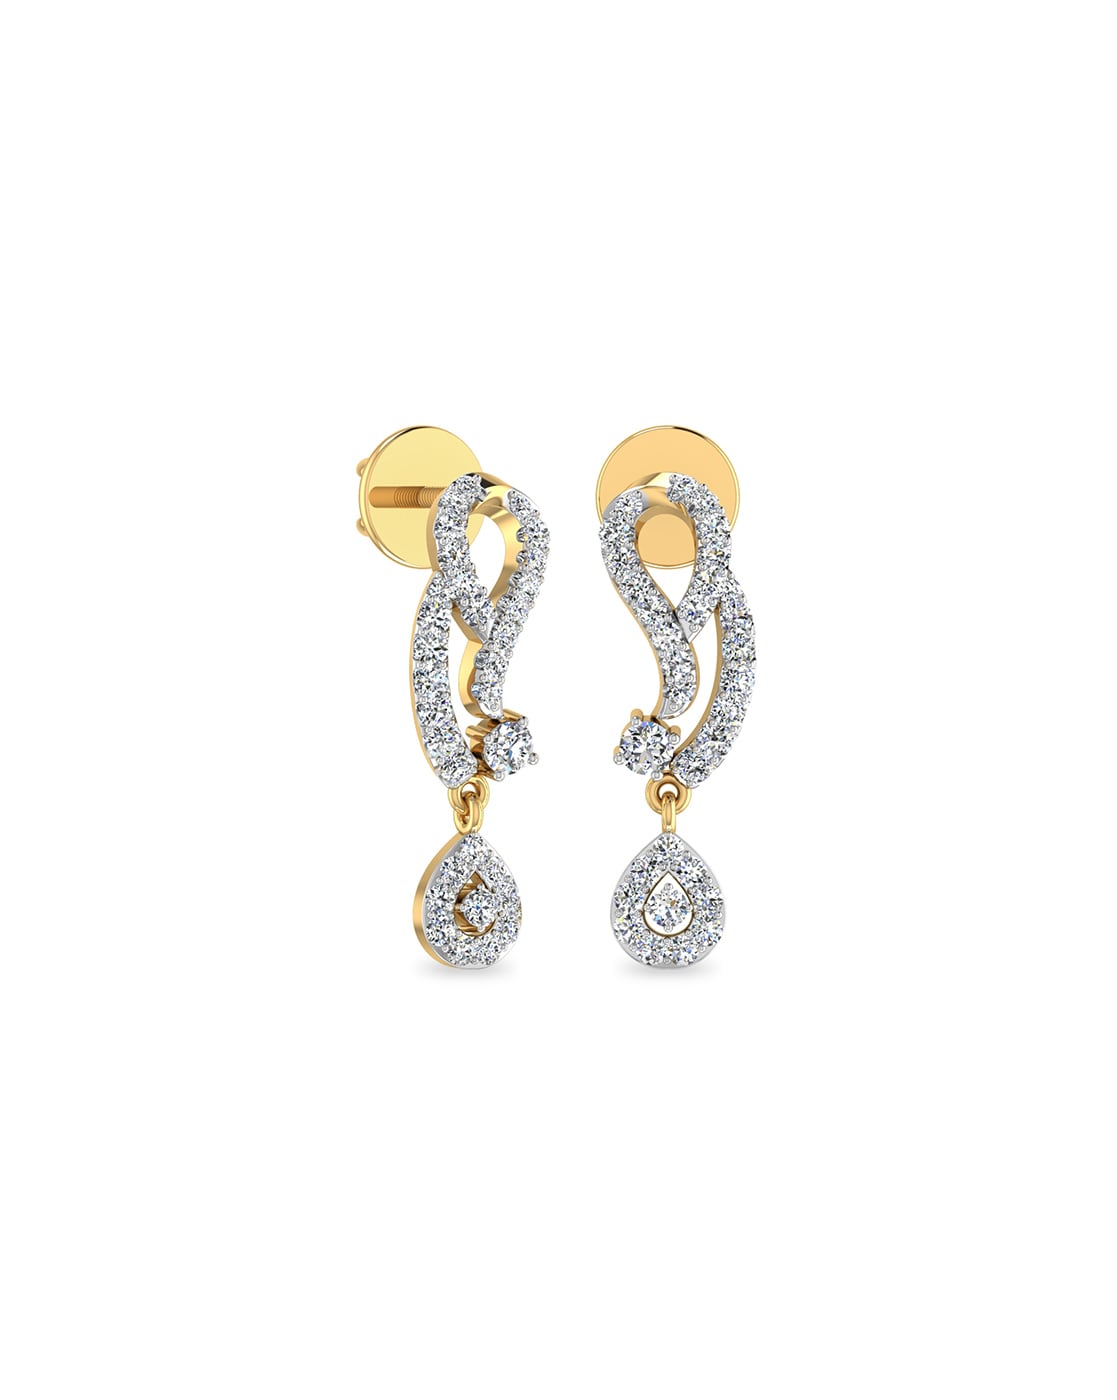 BUY DIAMOND EARRINGS FOR WOMEN AT THE BEST PRICES  Waman Hari Pethe  Jewellers